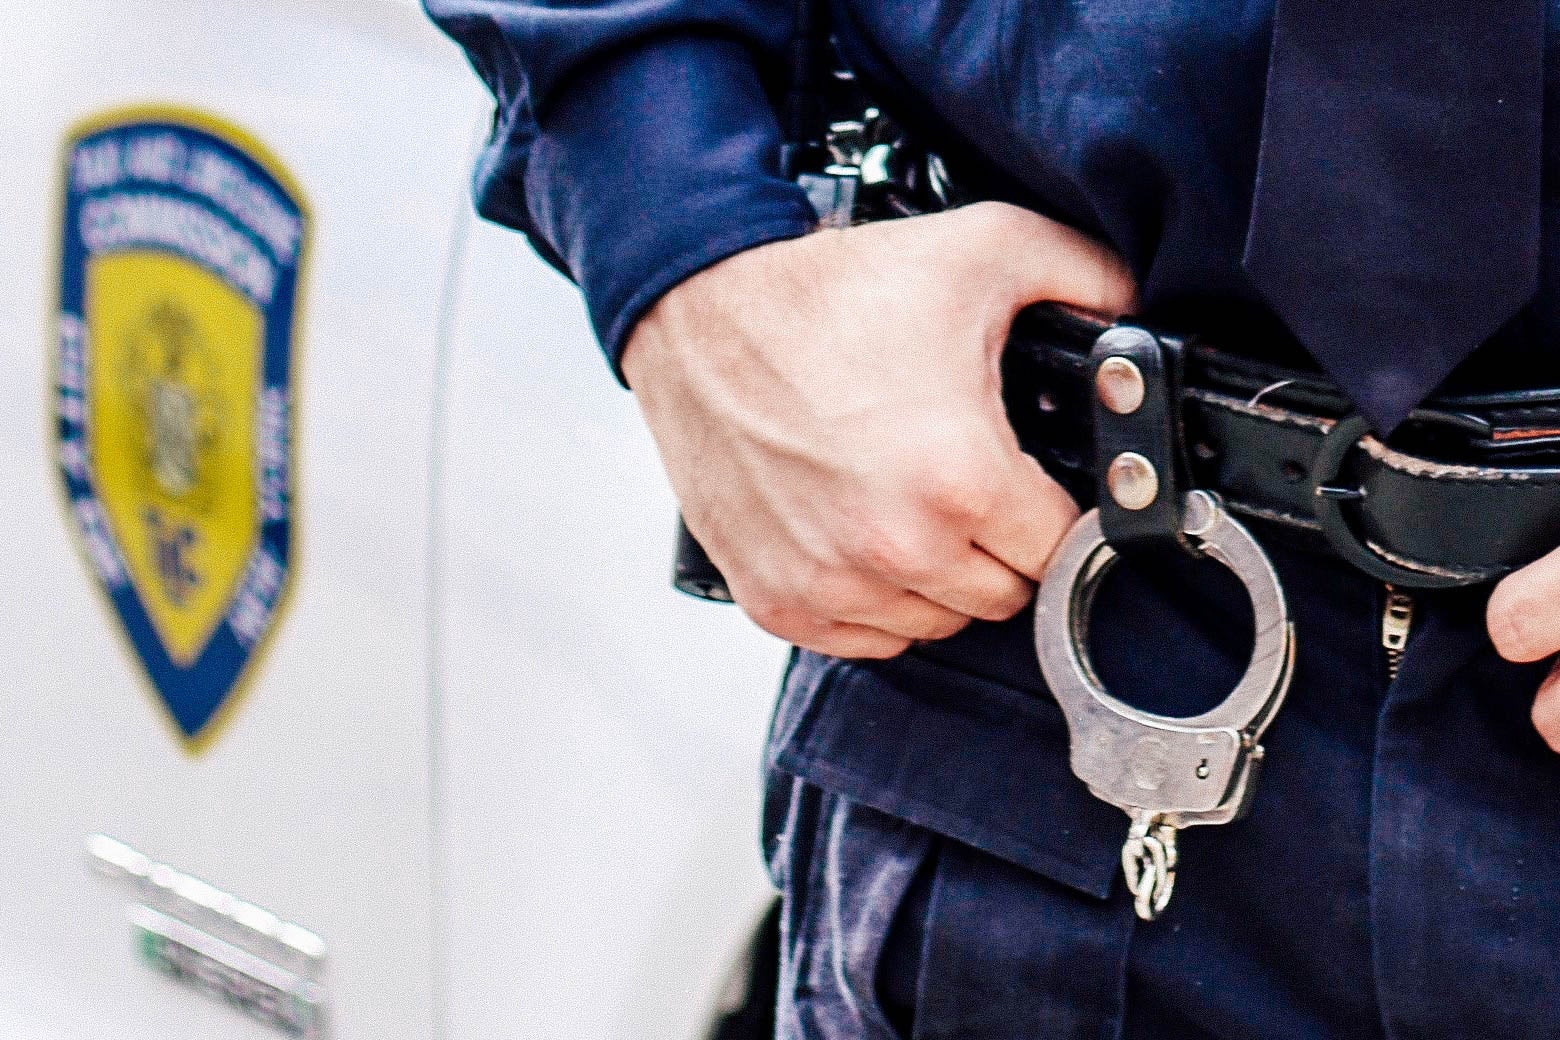 A police officer gripping his duty belt, which has handcuffs hanging off of it